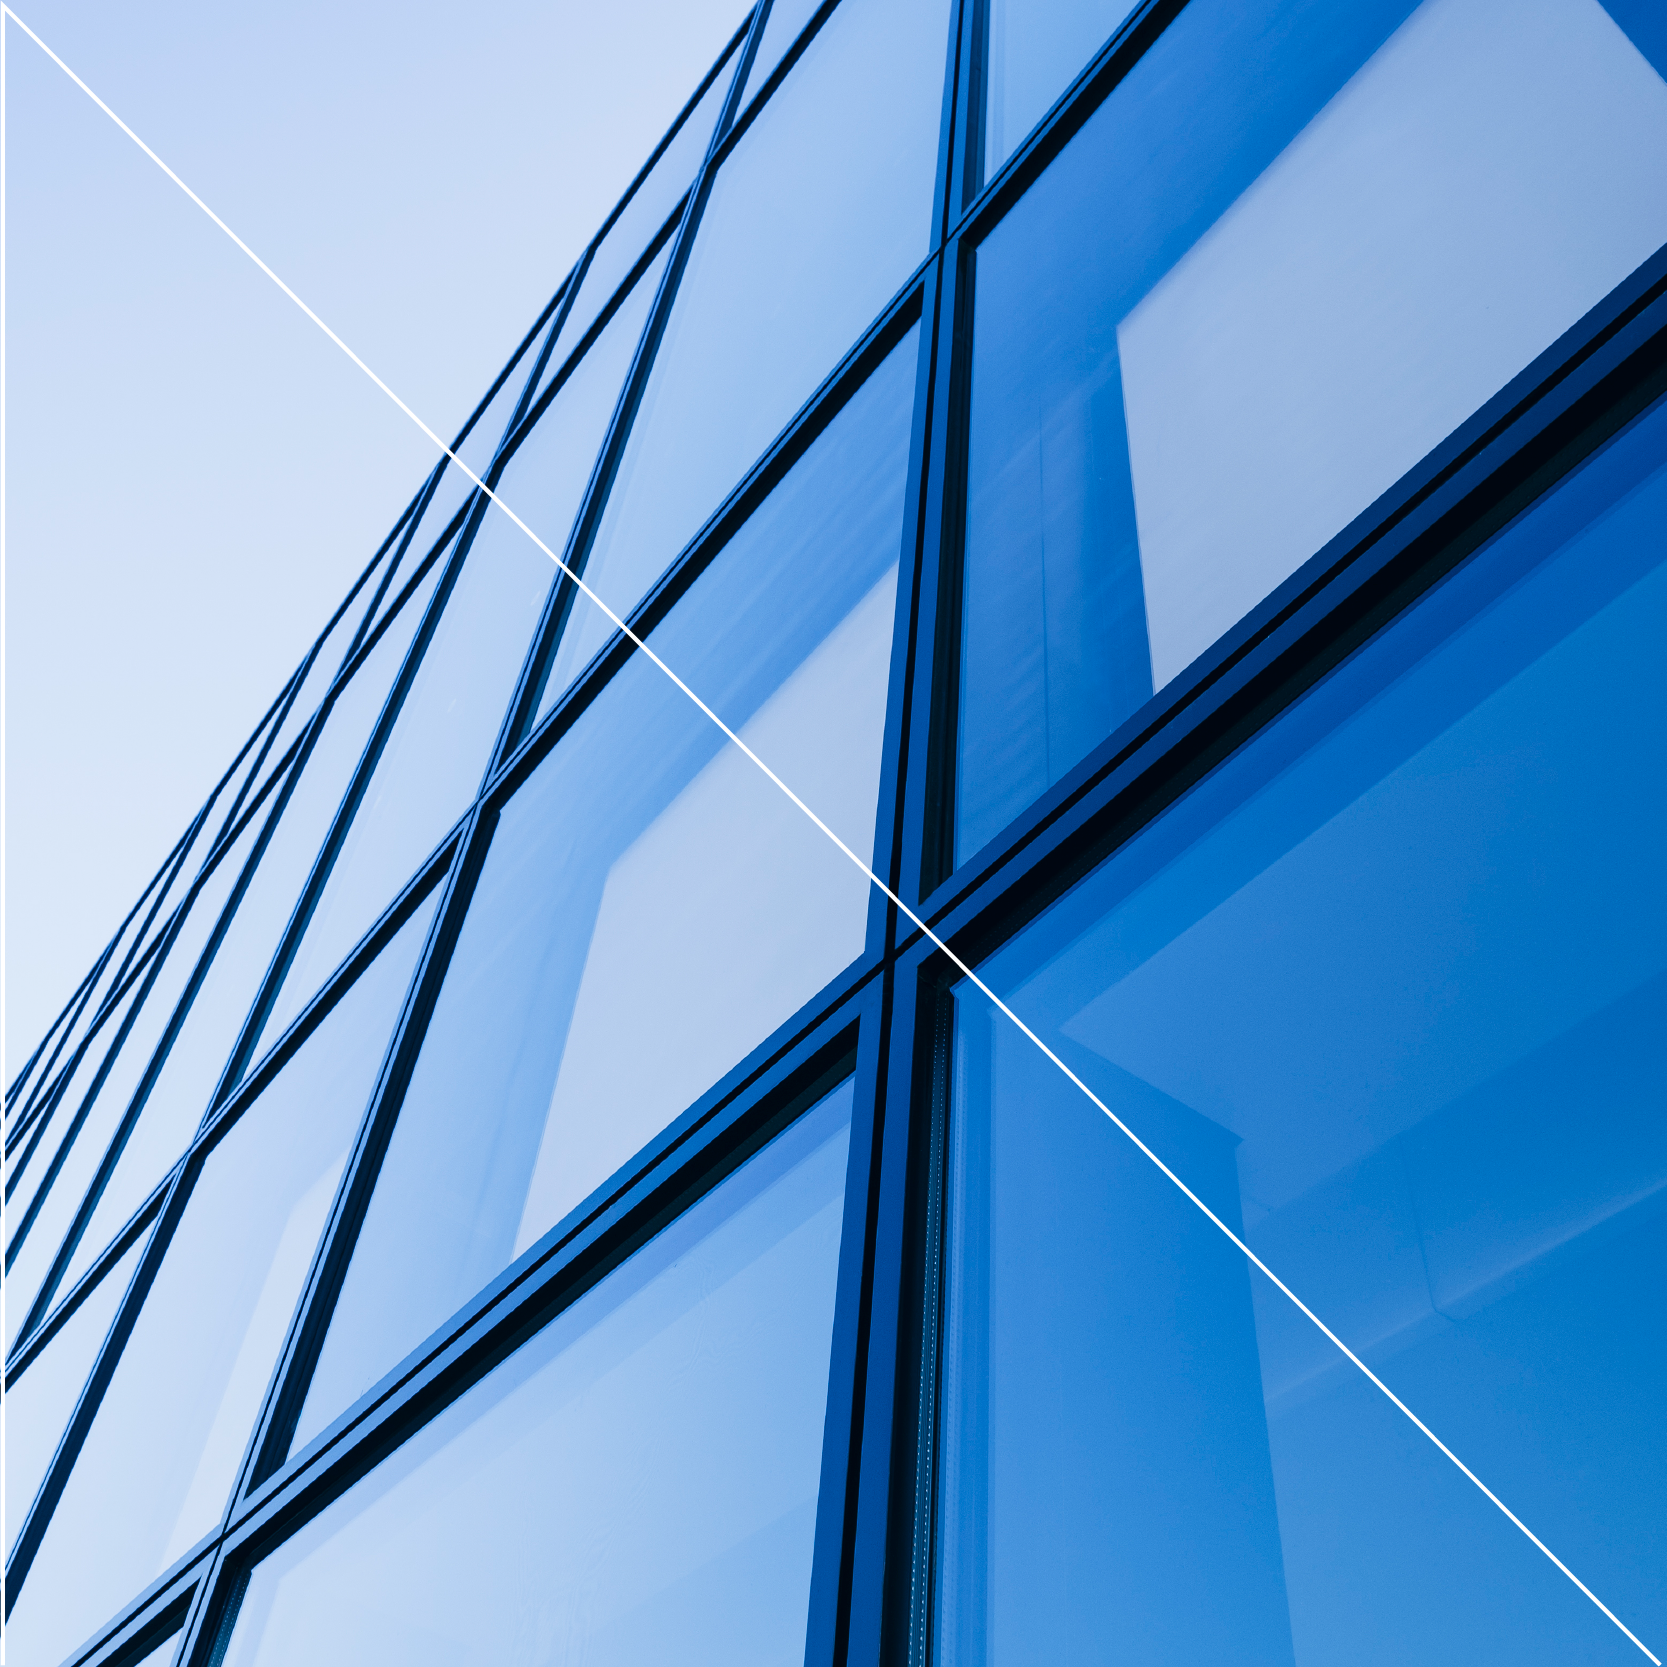 Up close of square windows reflecting the blue sky with a right angle white triangle across the image for stylistic impact